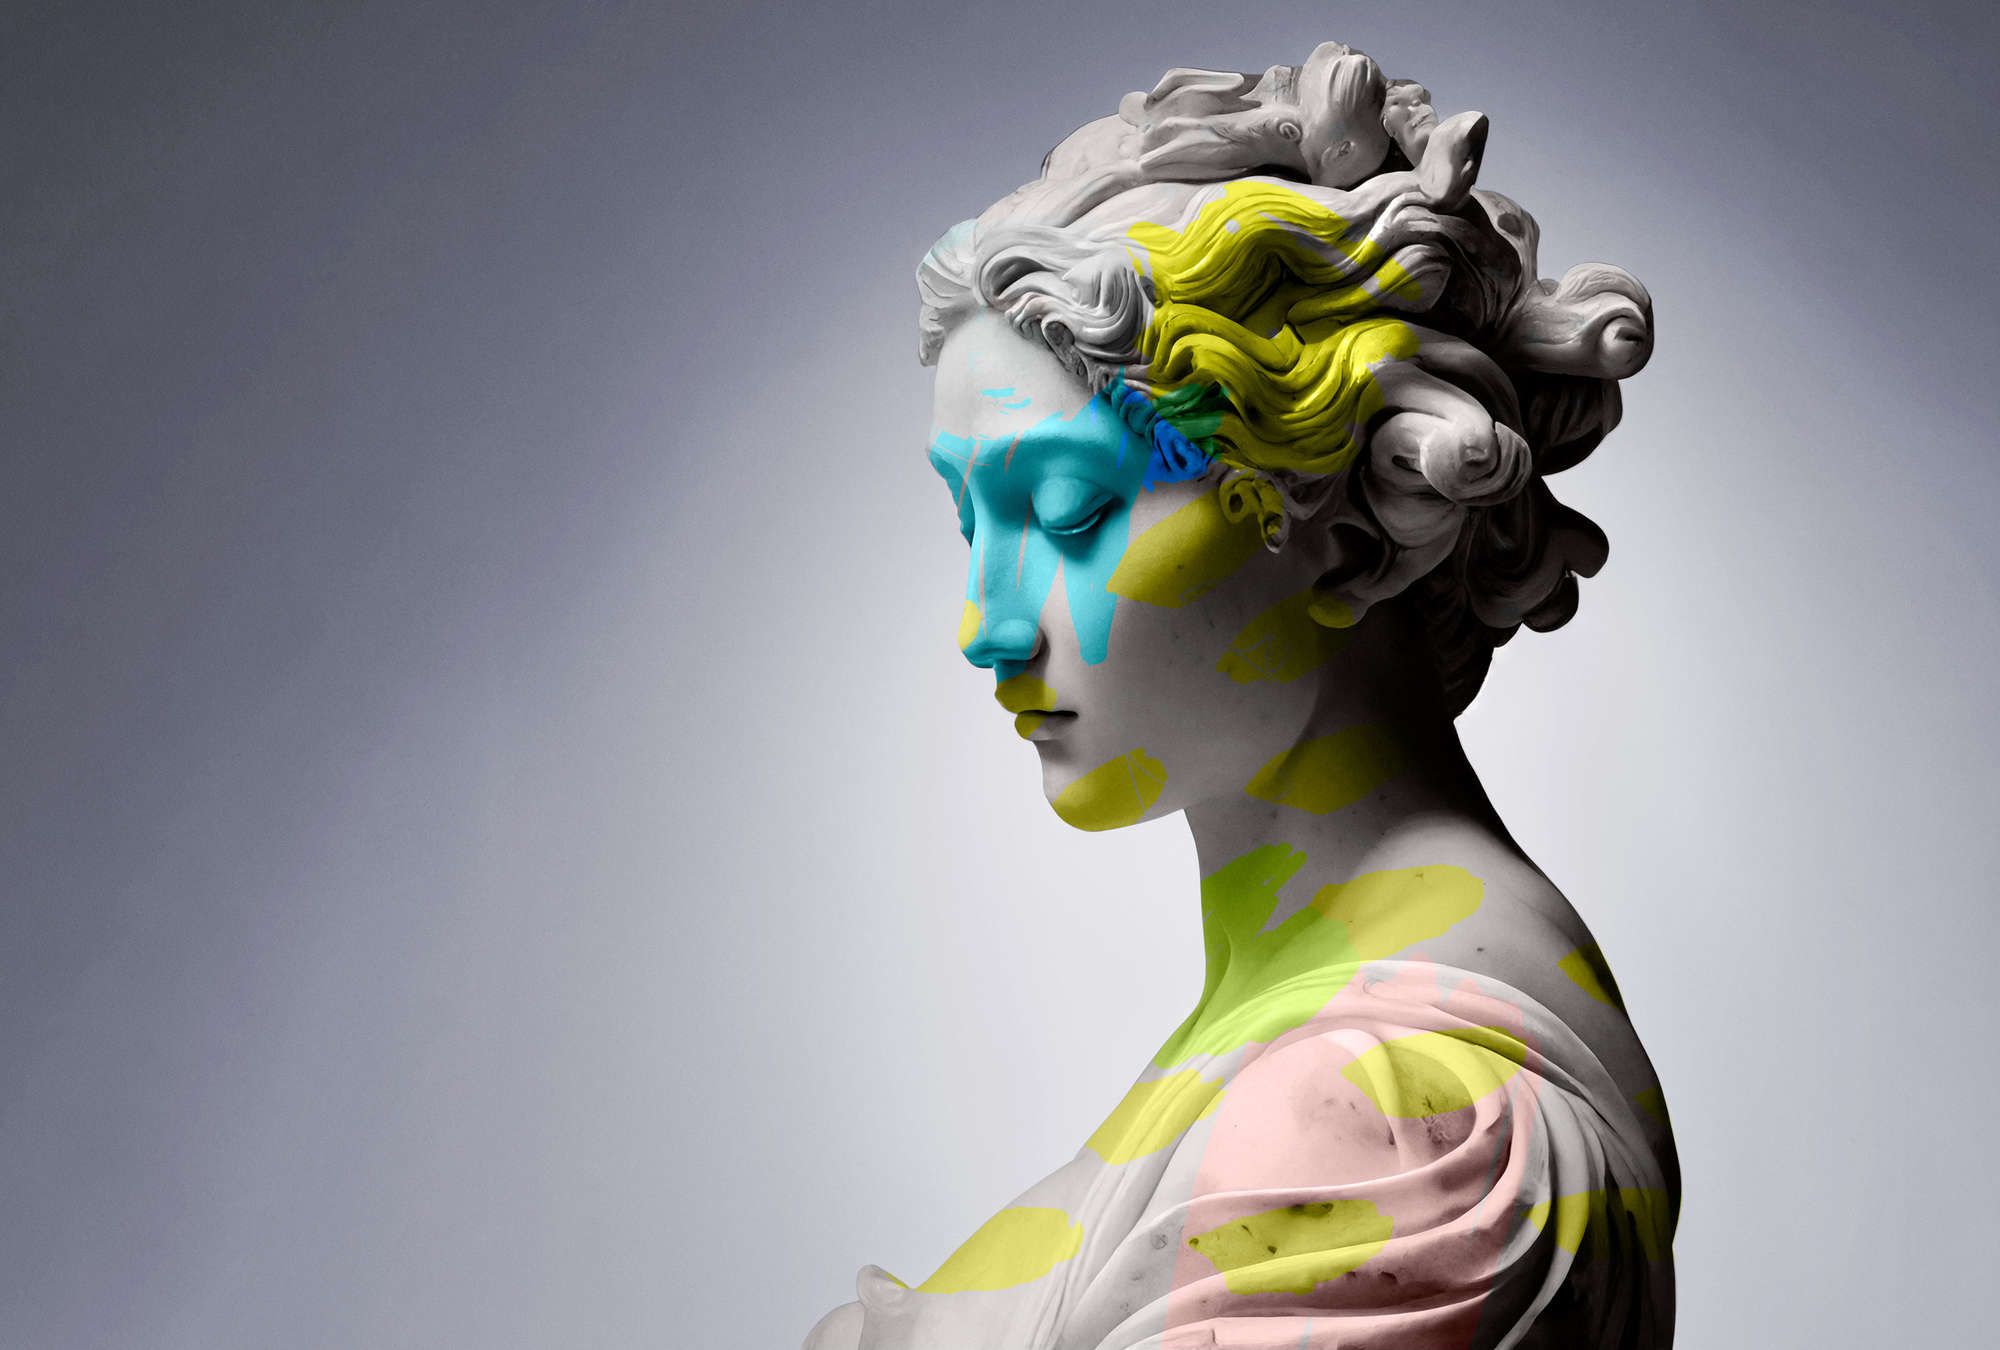             Photo wallpaper »clio« - female sculpture with colourful accents - Smooth, slightly shiny premium non-woven fabric
        